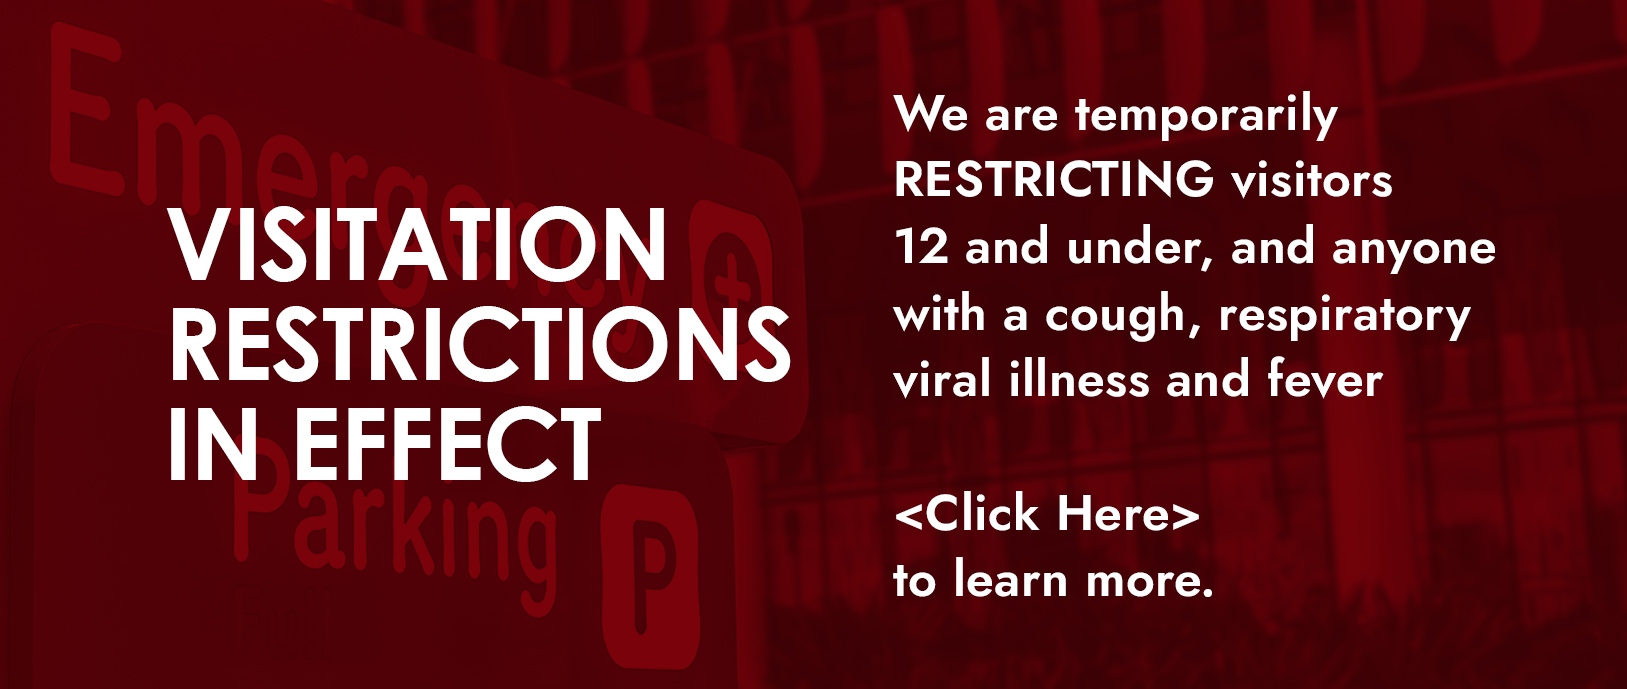 VISITATION RESTRICTIONS IN EFFECT

We are temporarily RESTRICTING visitors under the age of 12, and anyone with a cough, fever, or sore throat.

<CLIKC HERE> to learn more.